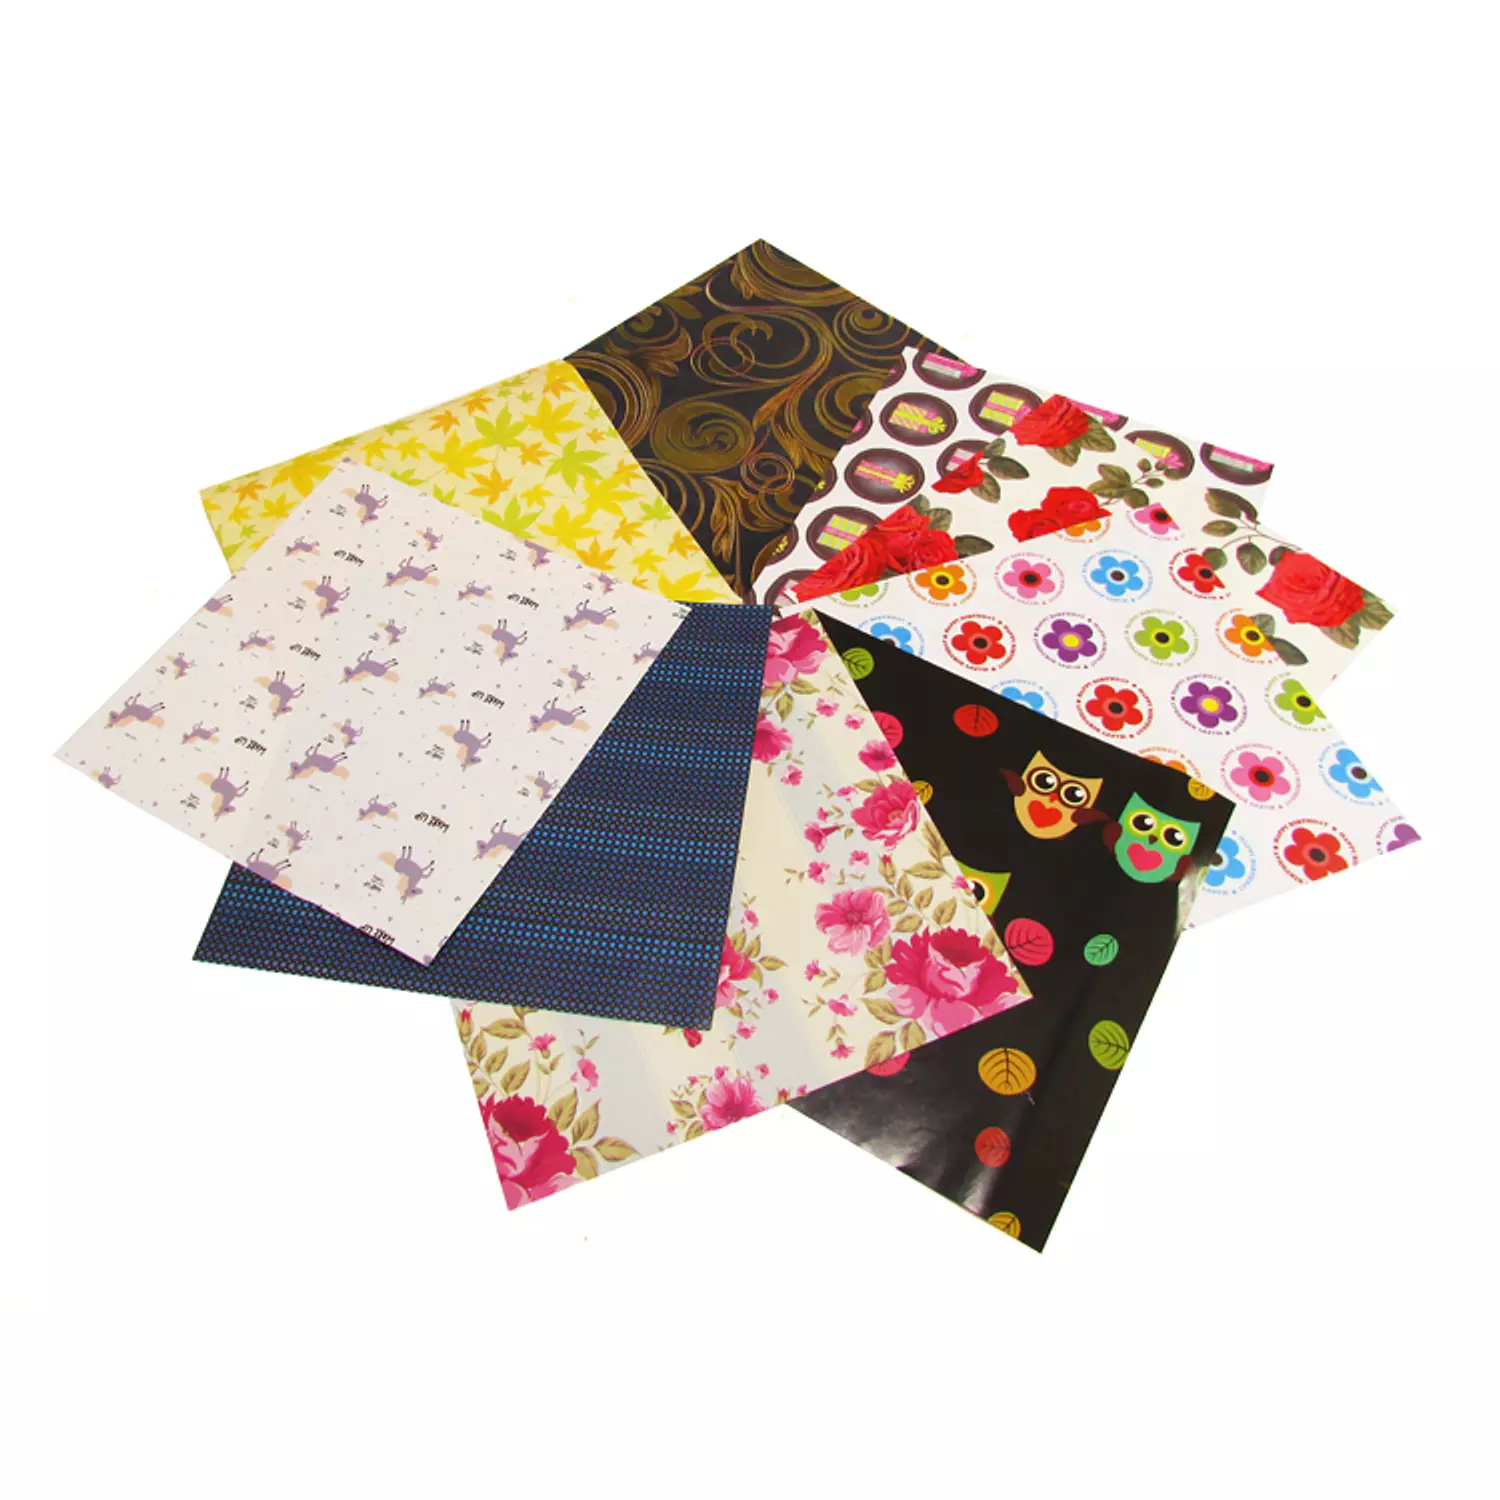 Packet of 50 printed origami papers  0